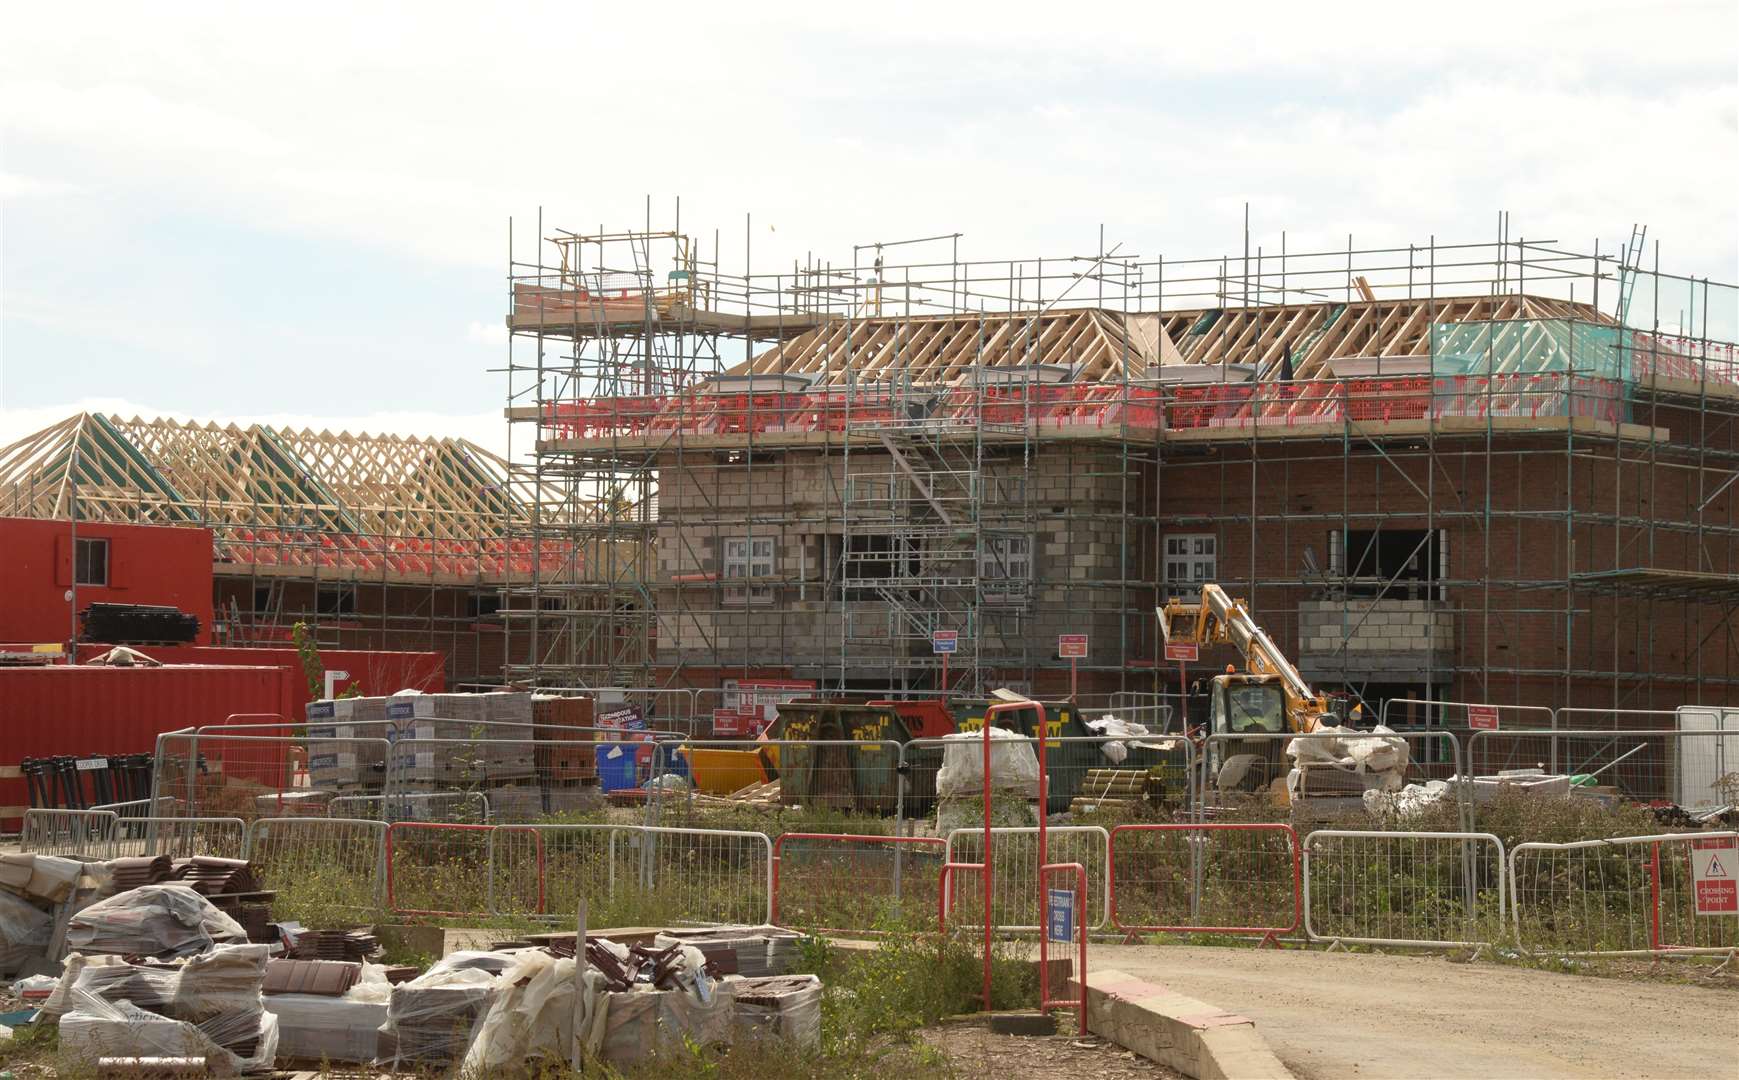 Recent changes to national policy could see 1,000 homes built every year in the Canterbury district until 2031